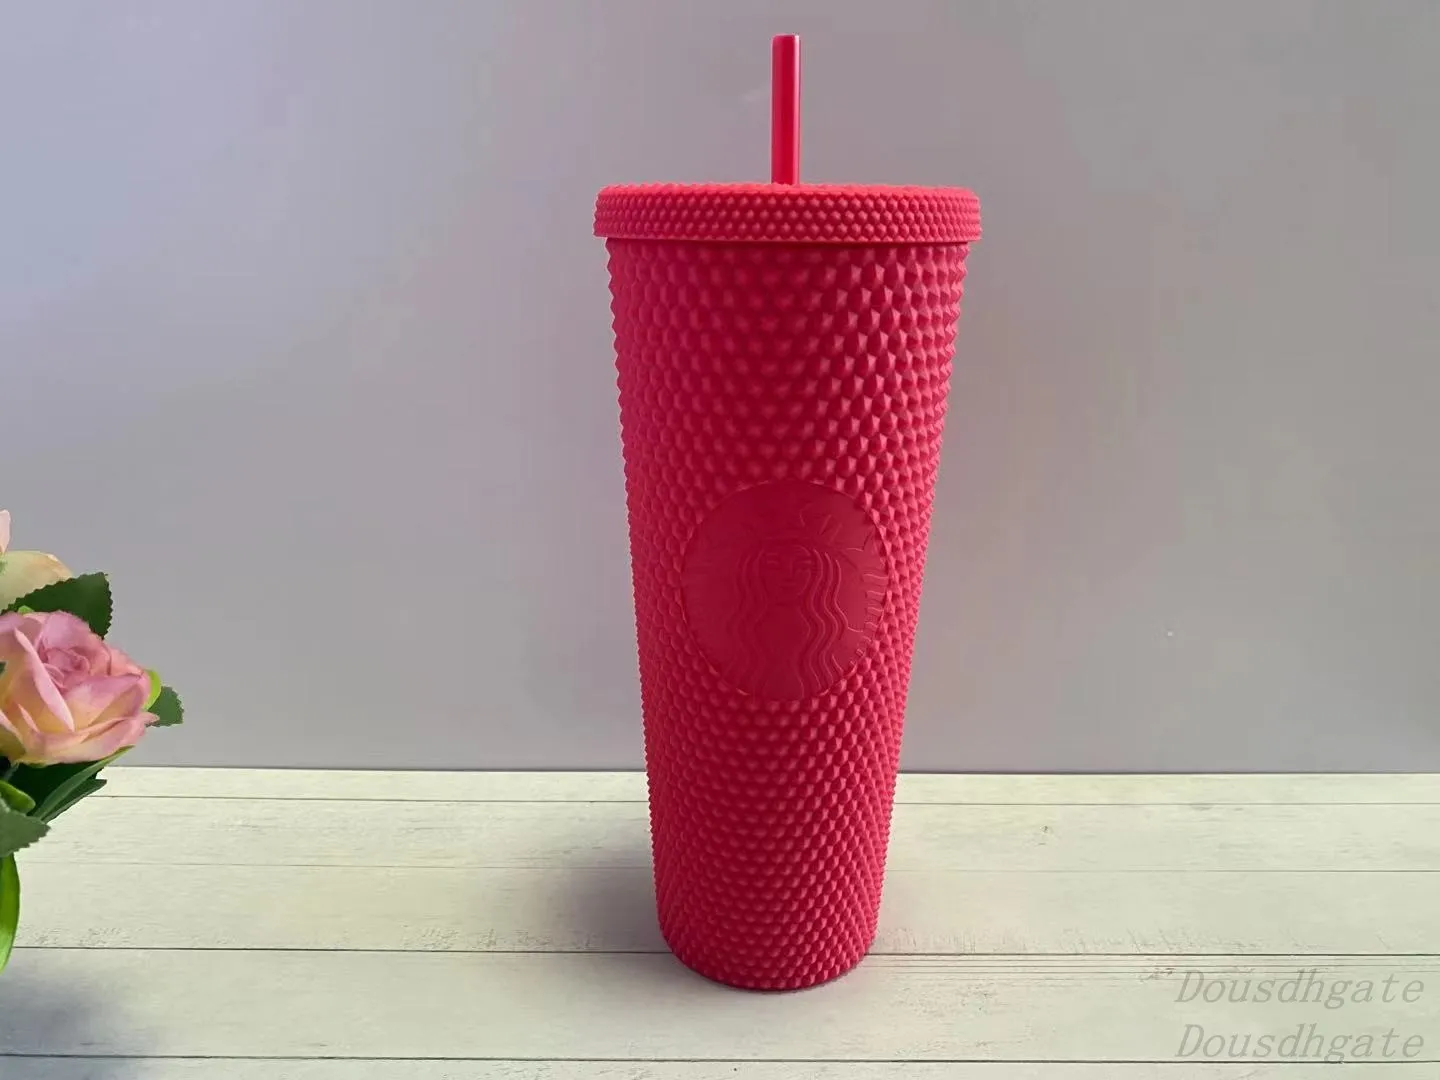 Starbucks Double Pink Durian Laser Straw Cups 710ML Tumblers Mermaid Plastic Cold Water Coffee Cup Gift Mugs186D